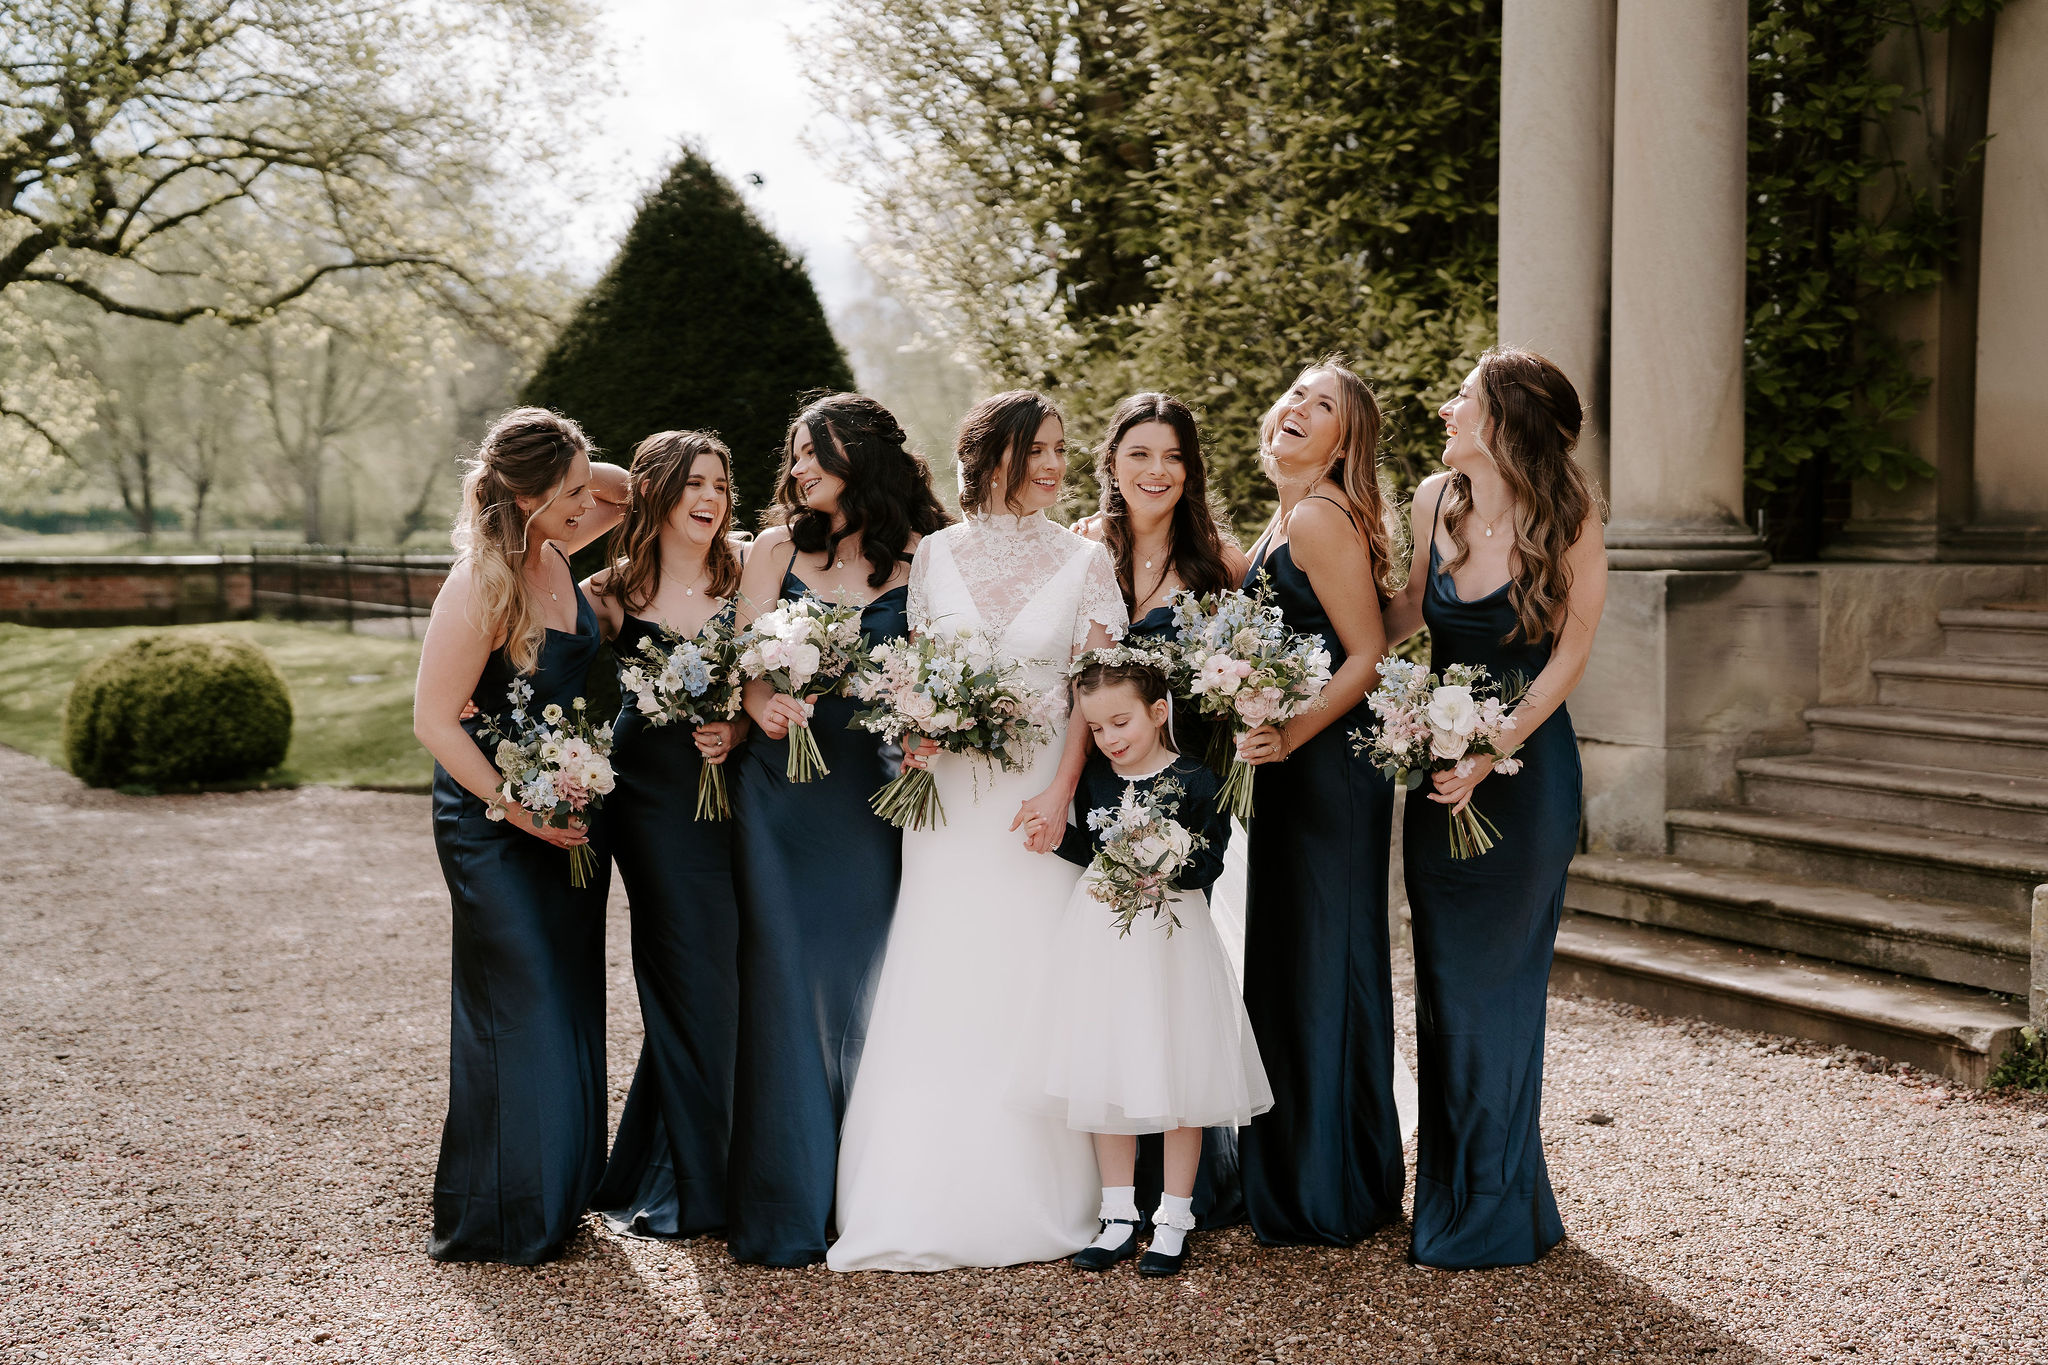 Six bridesmaids wearing navy silk slip dresses surround a bride wearing a white lace short sleeved dress holding pastel bouquets